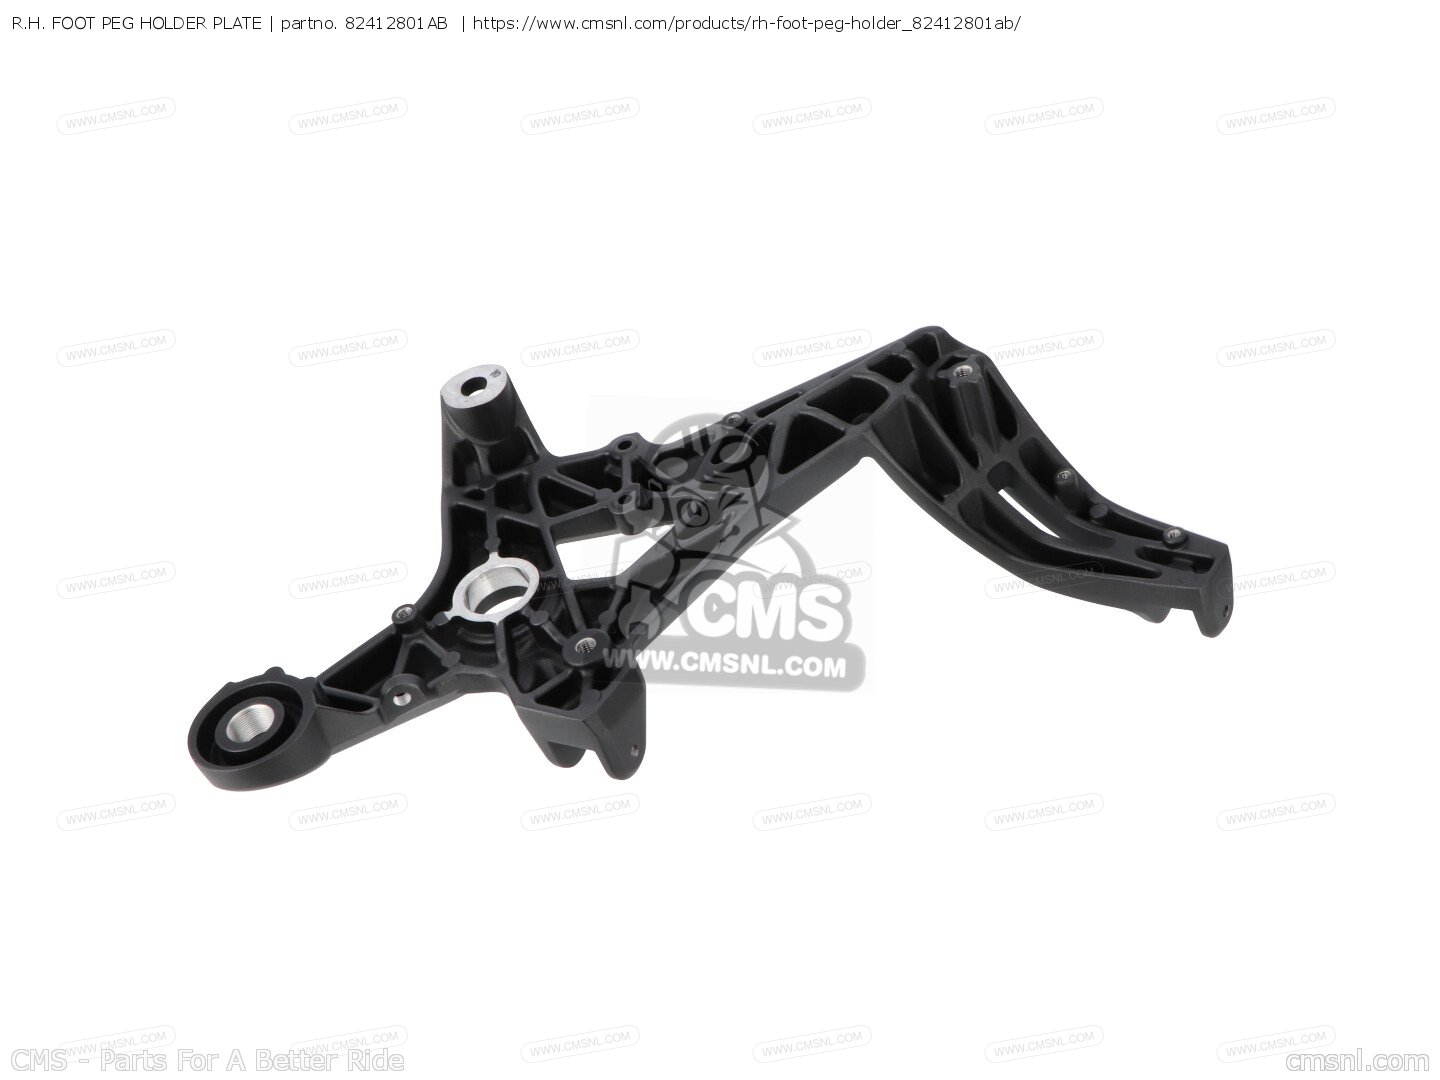 82412801AB: R.h. Foot Peg Holder Plate Ducati - buy the 82412801AB